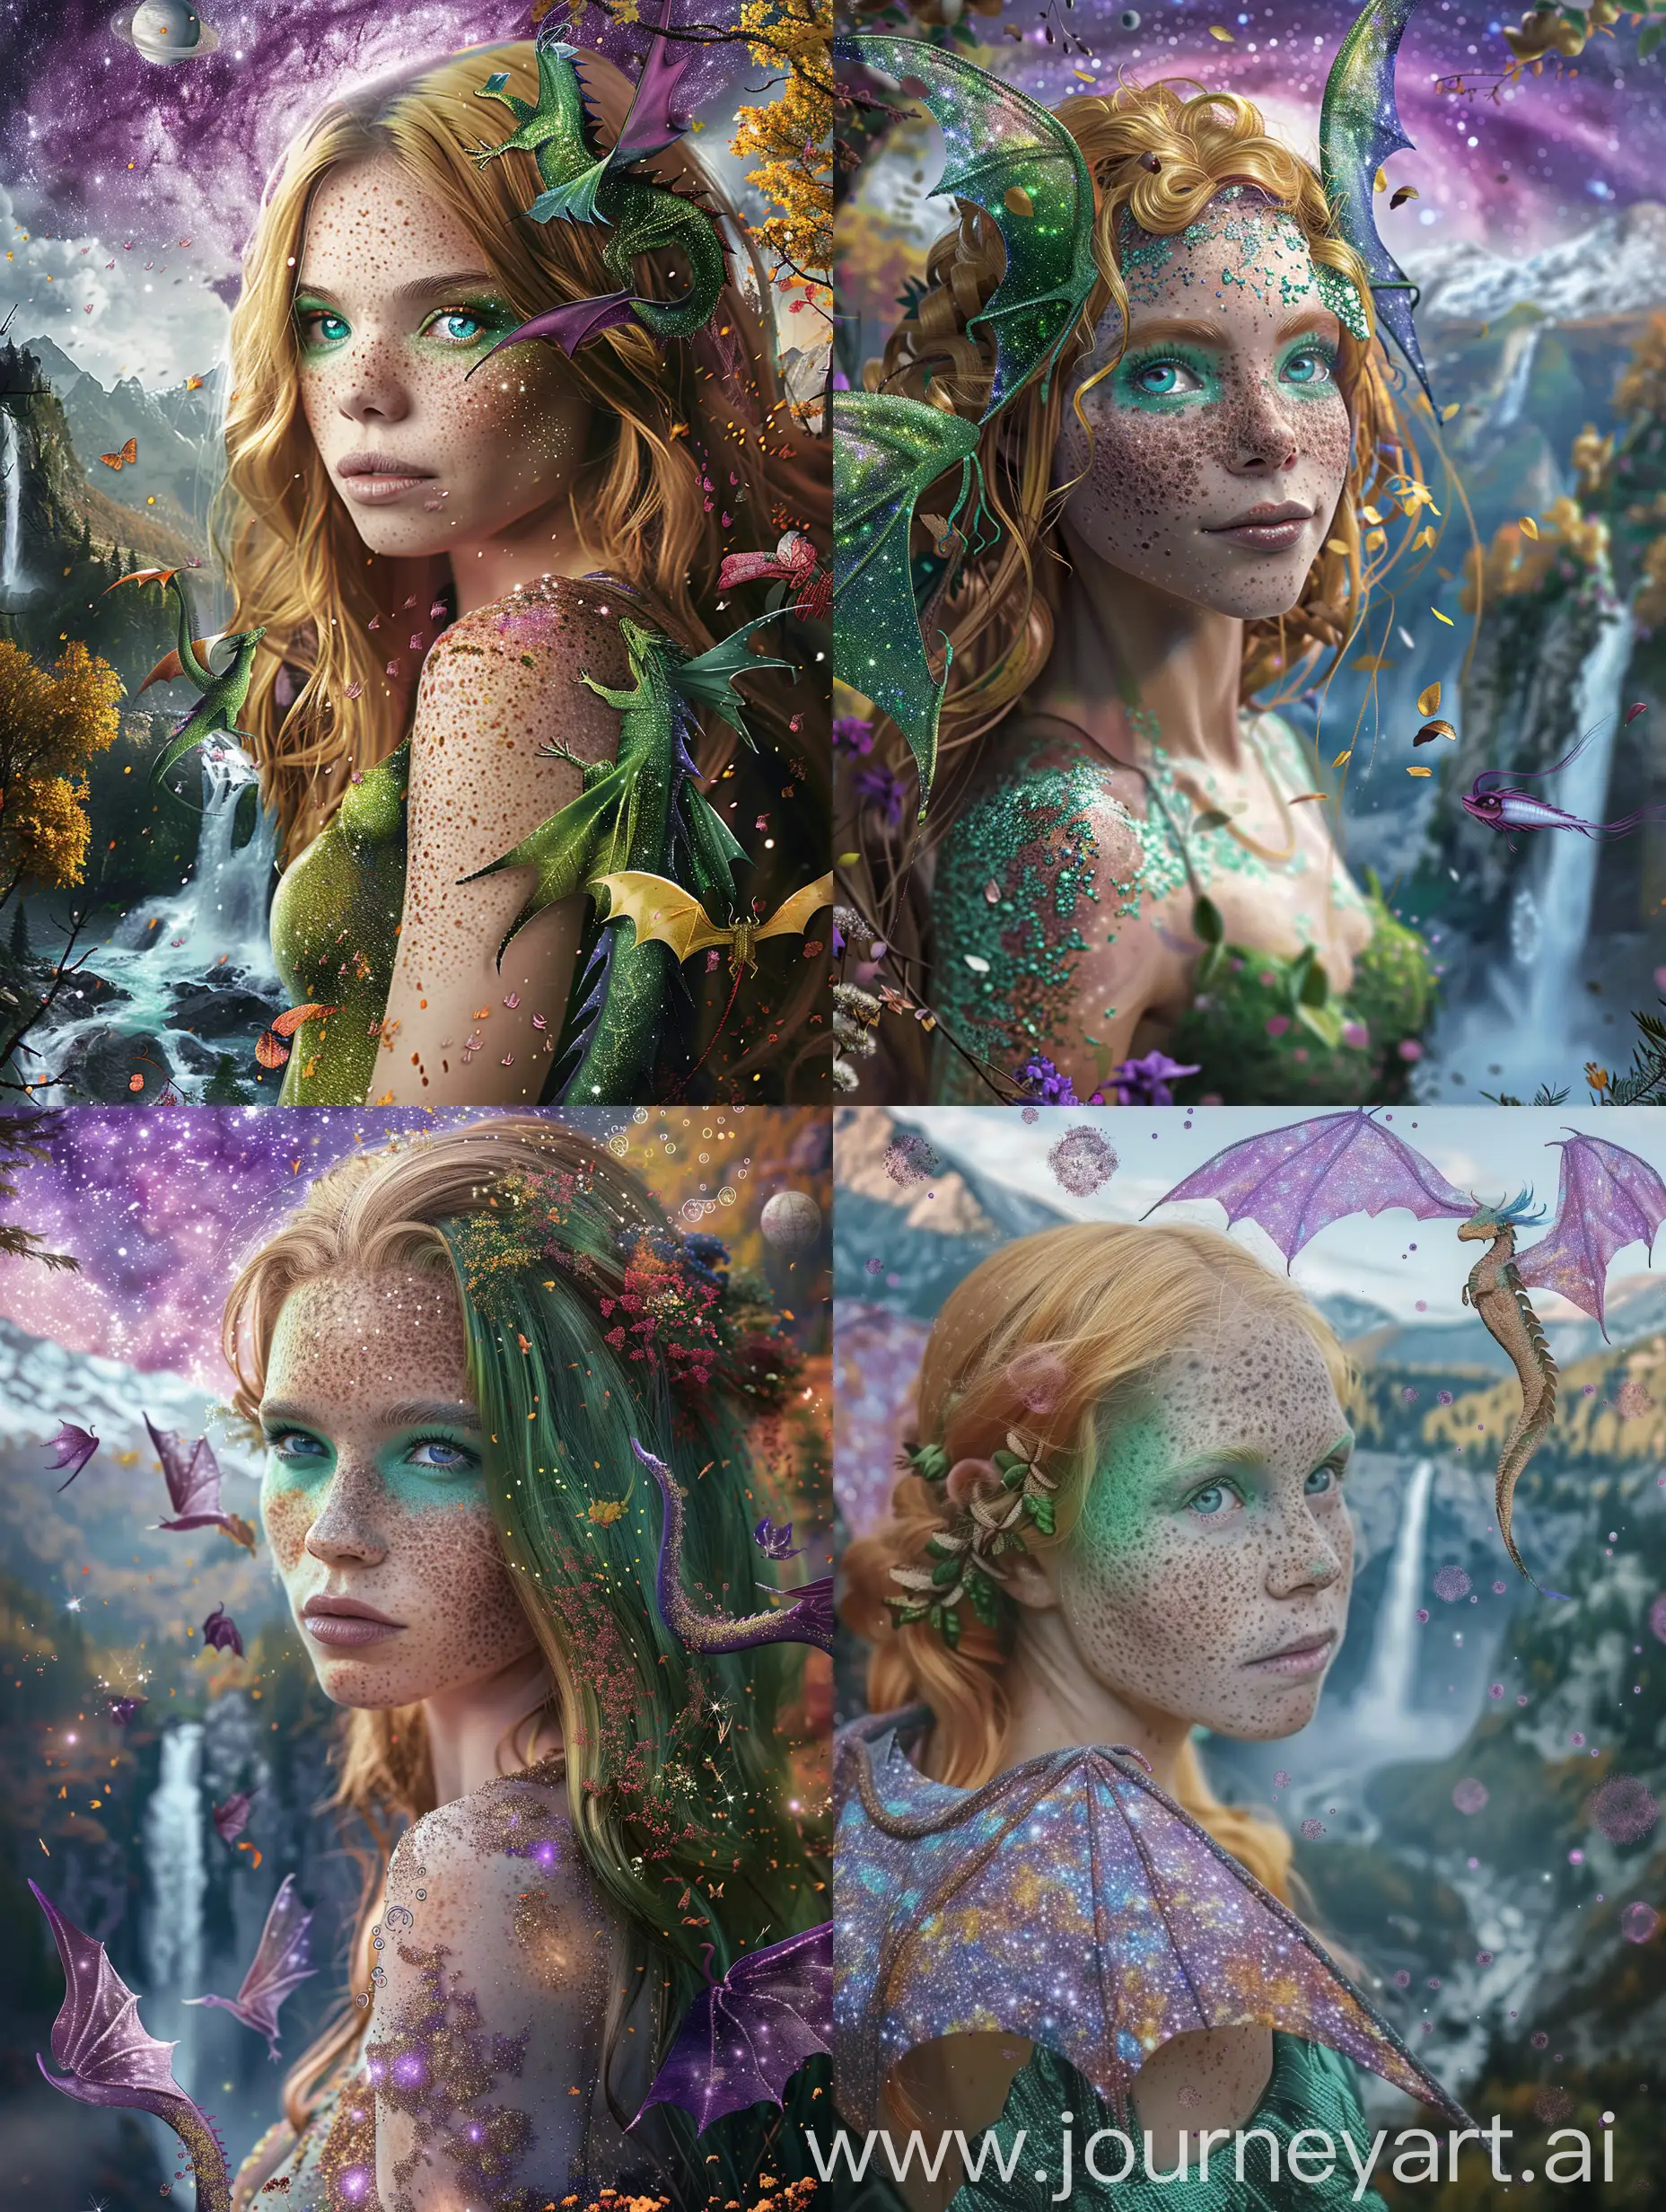 Enchanting-Autumn-Fantasy-Woman-with-Freckles-Dragons-and-Cosmic-Landscapes